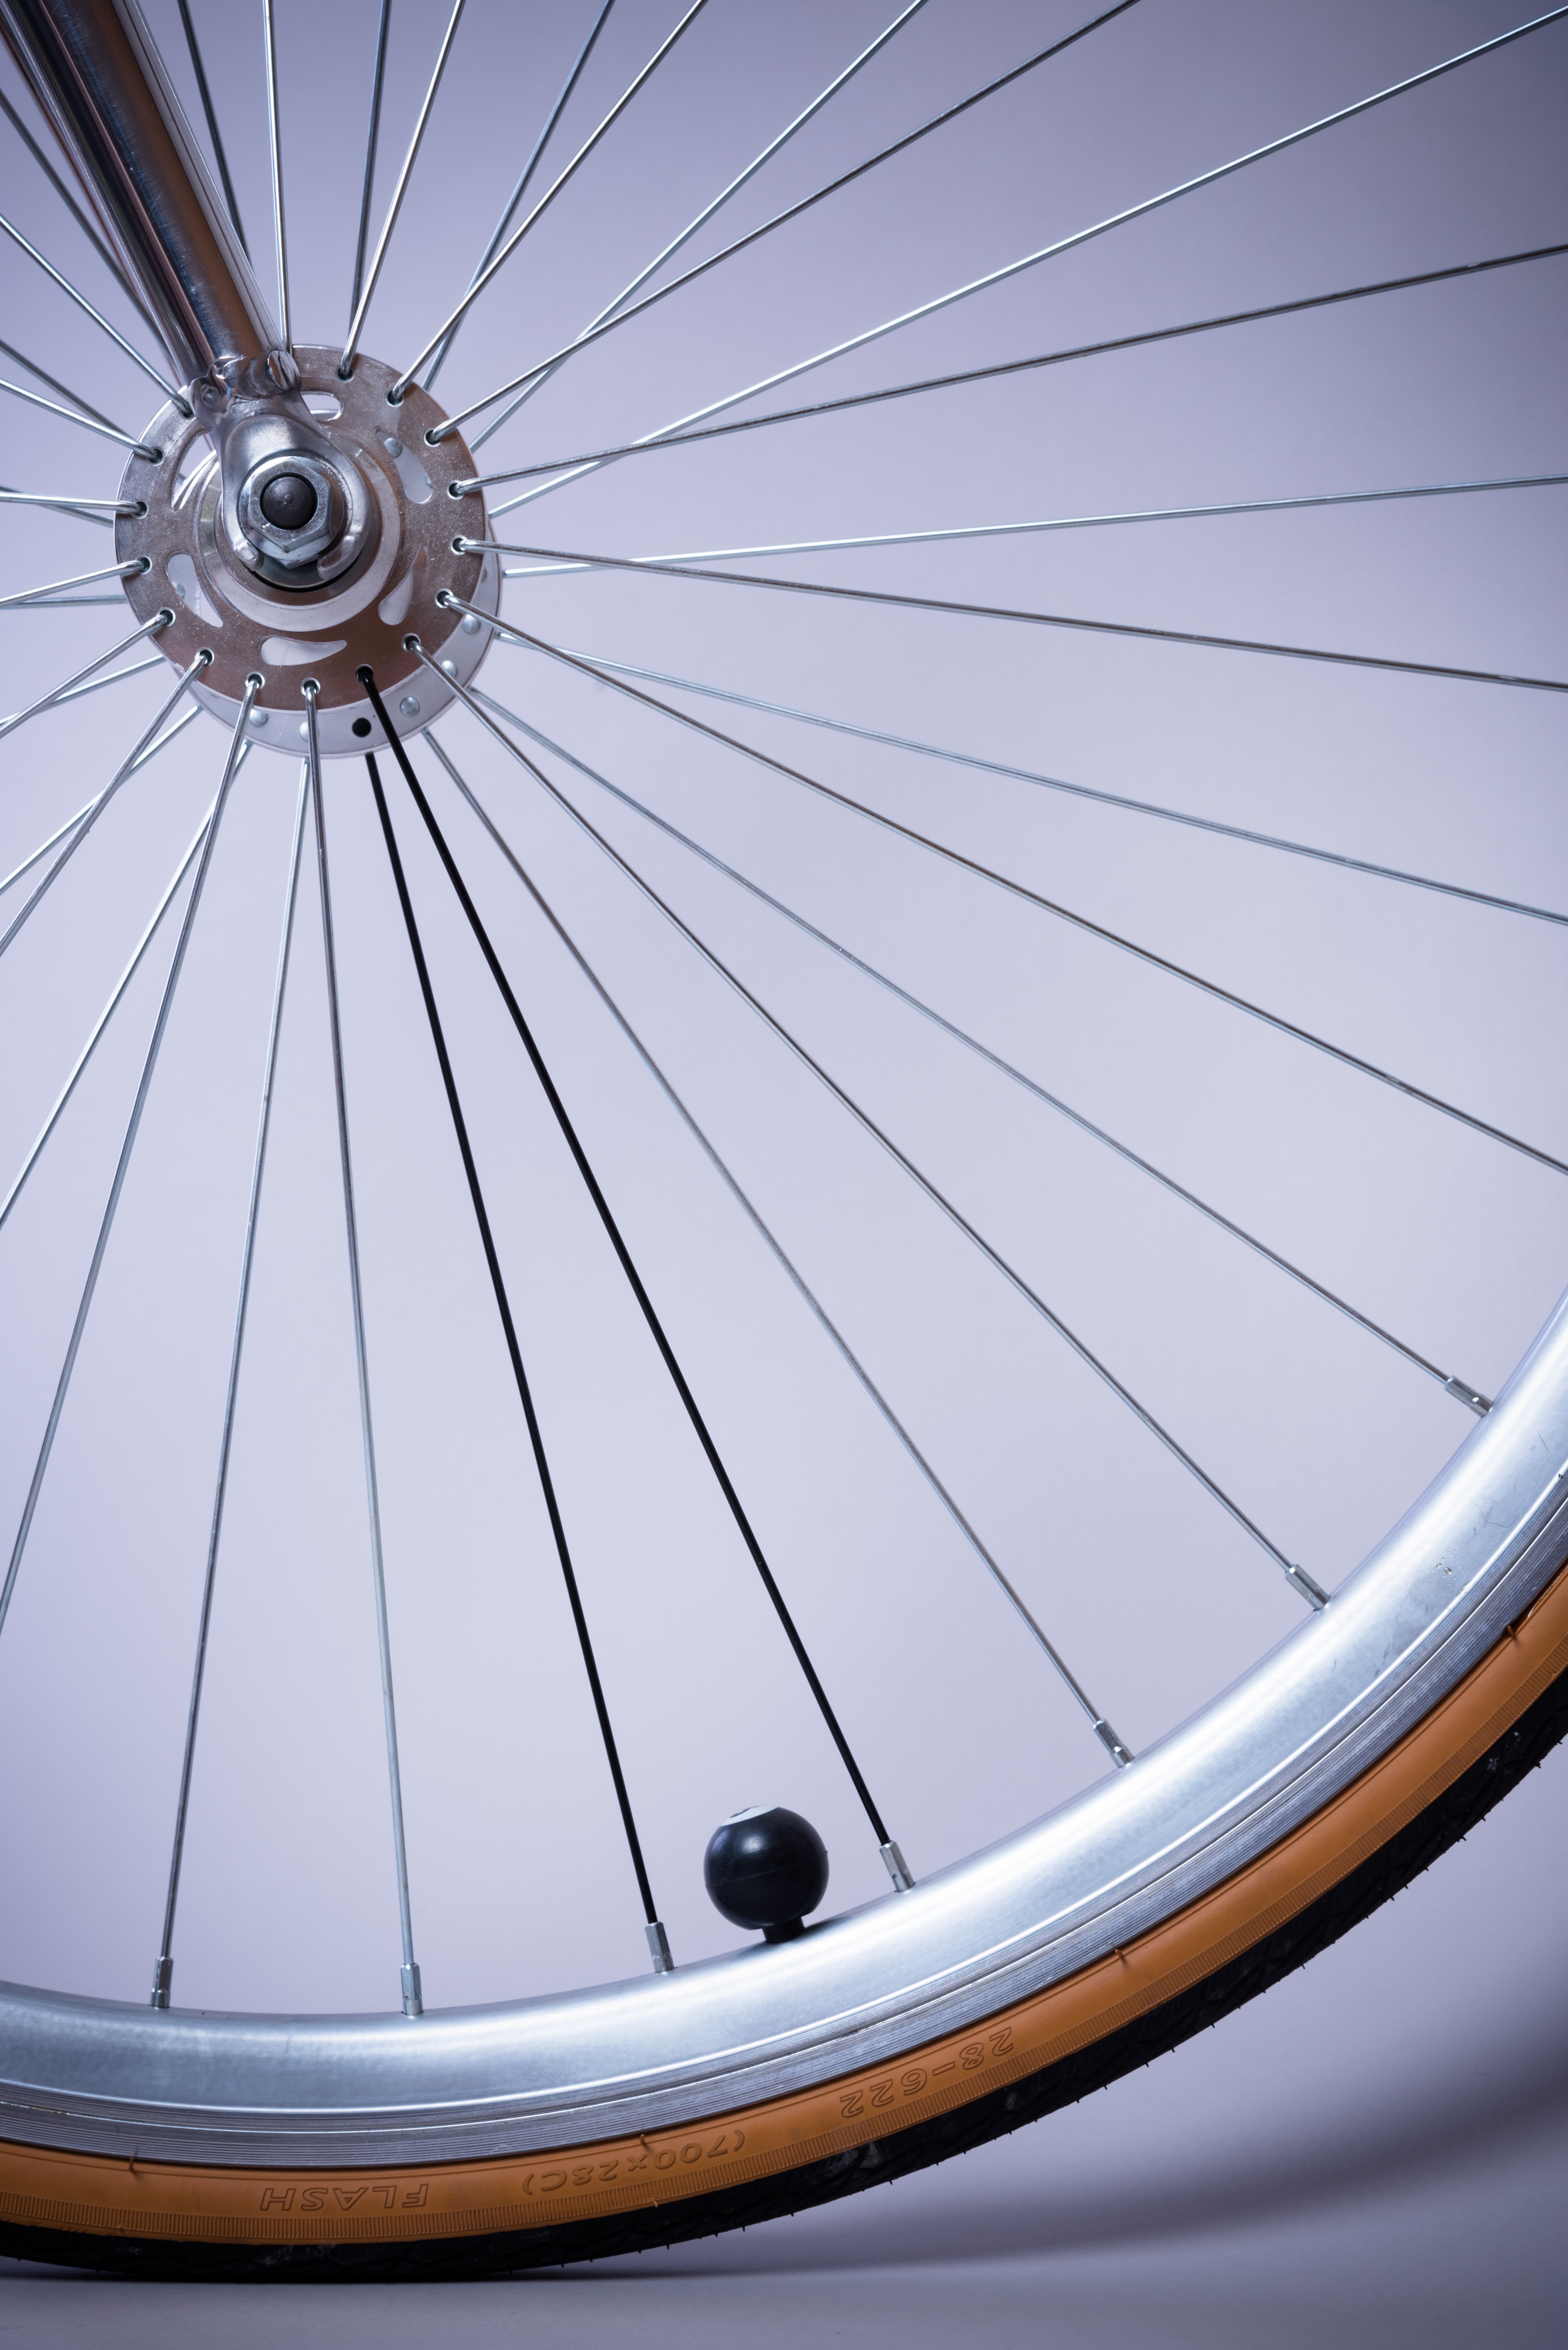 stainless steel wire spoke bicycle wheel and tire